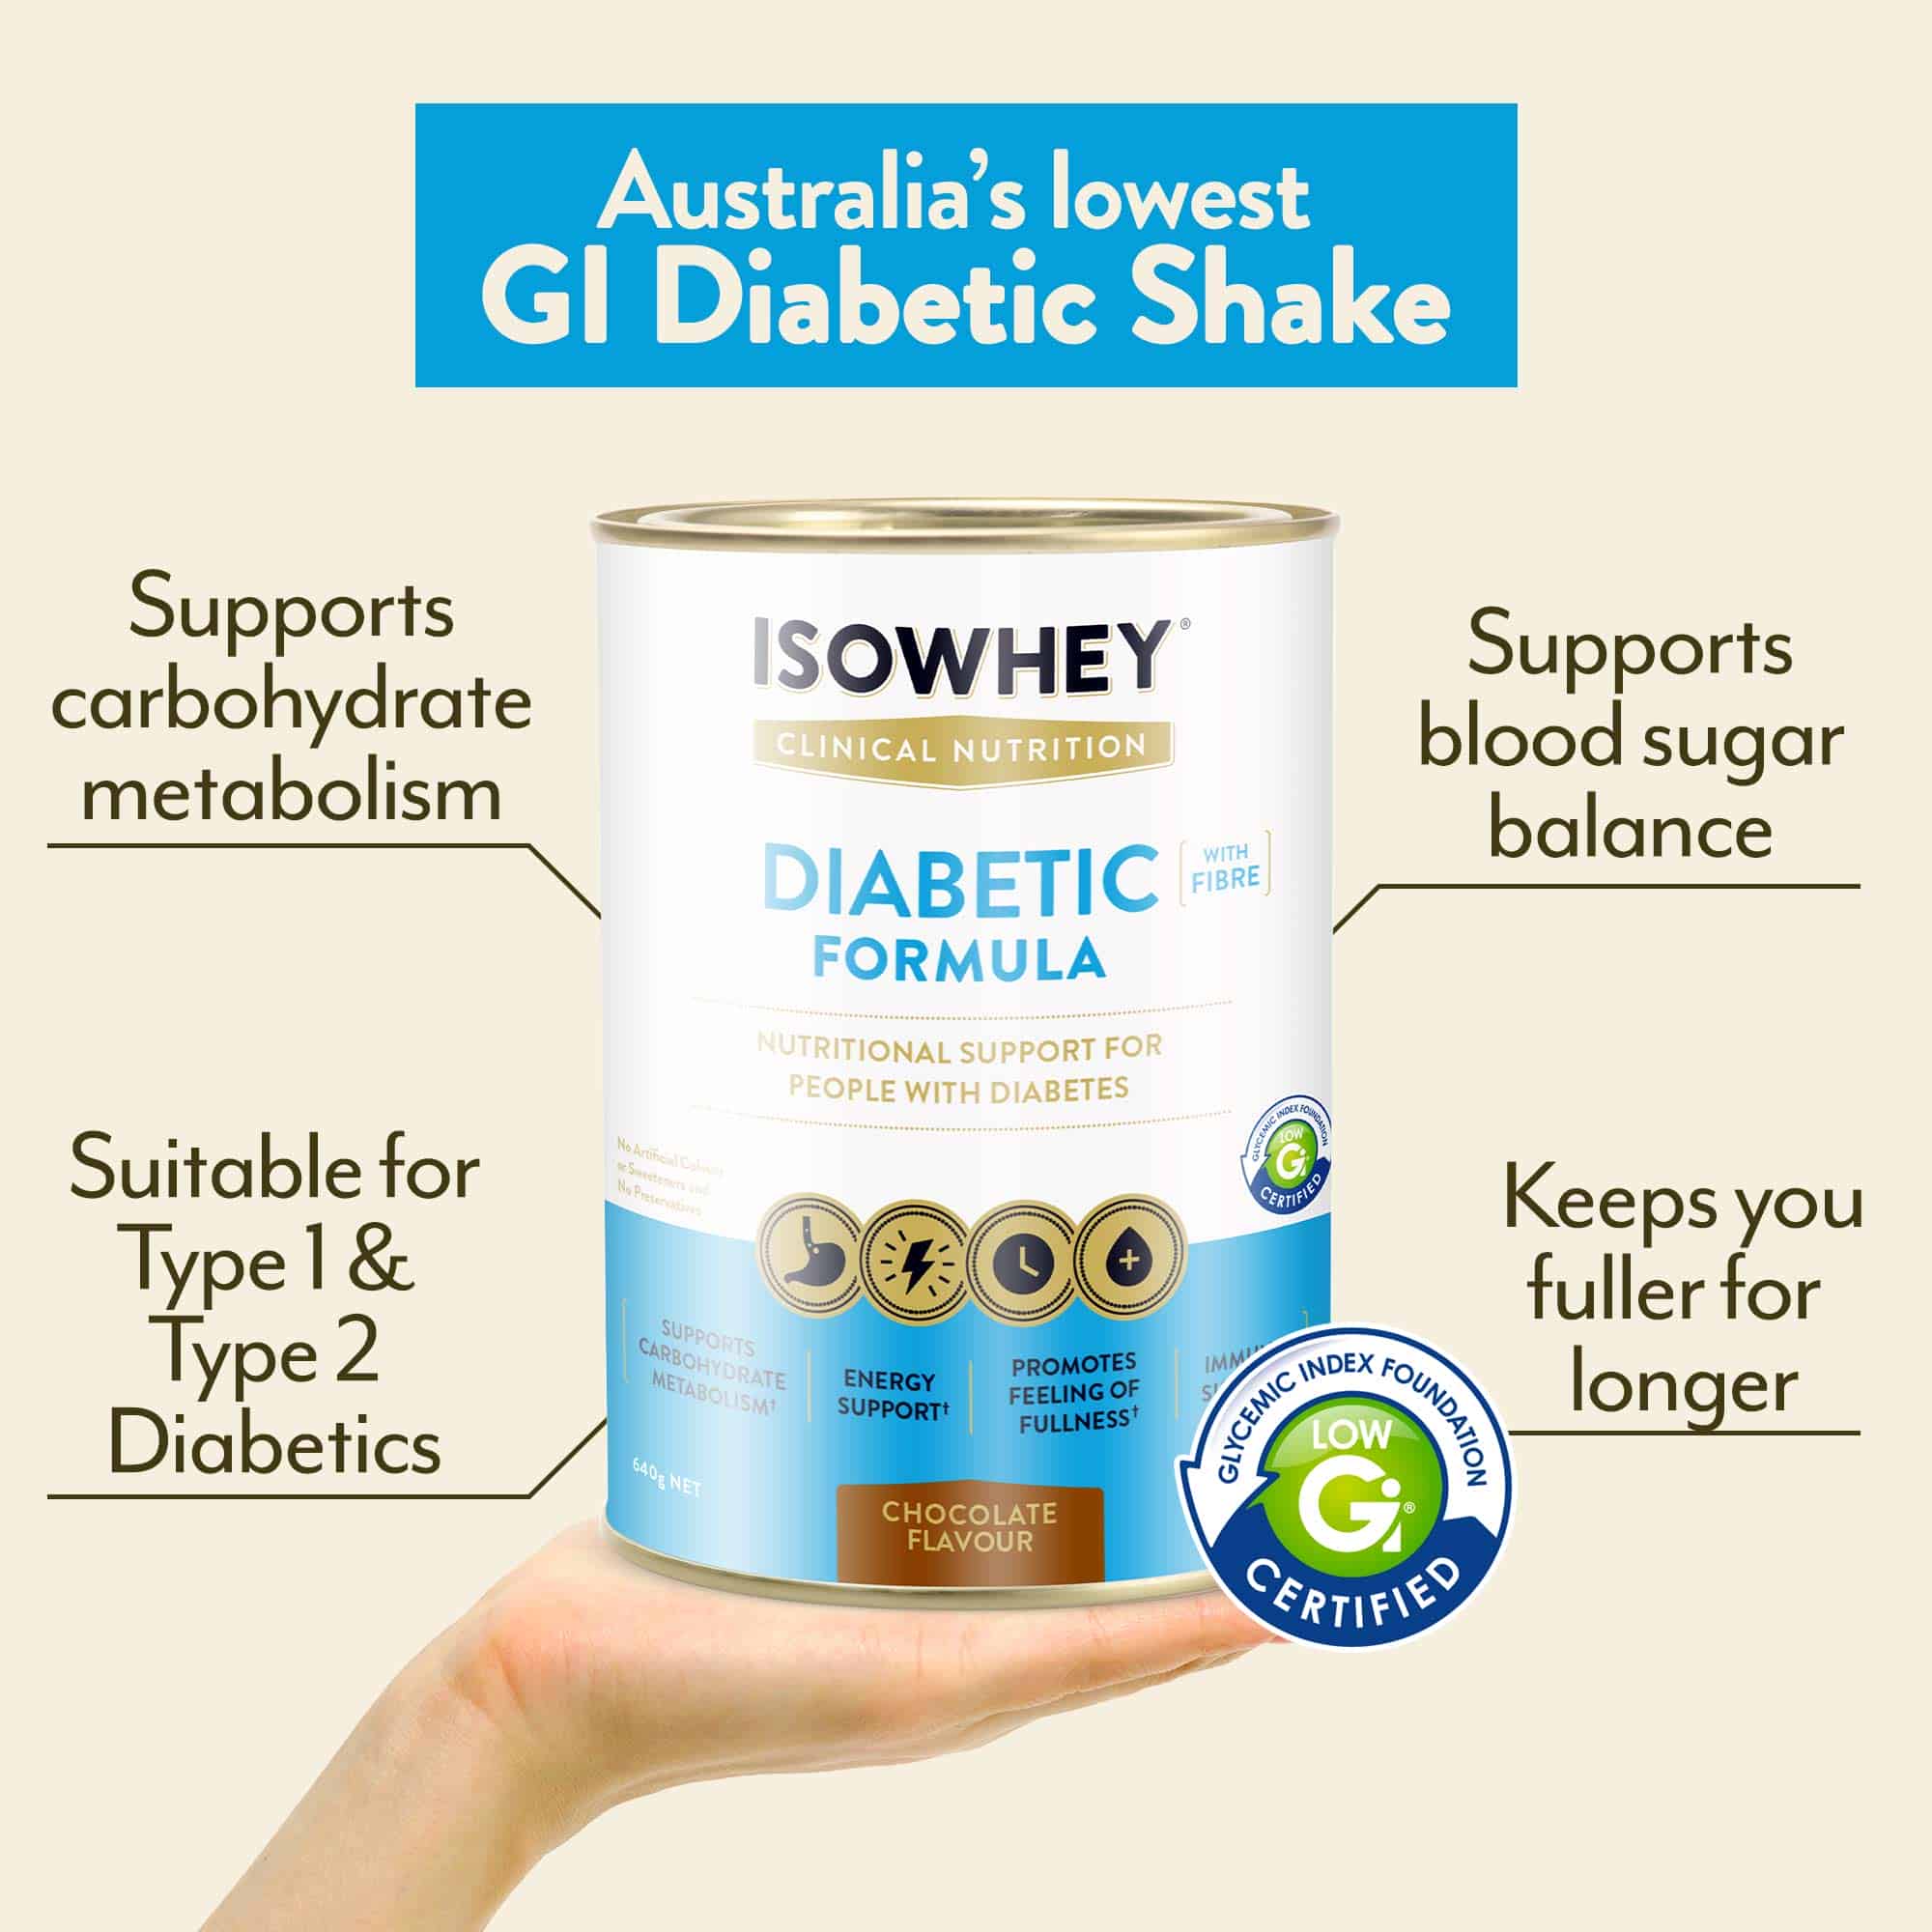 IsoWhey Clinical Nutrition Diabetic Formula Chocolate filled with micronutrients